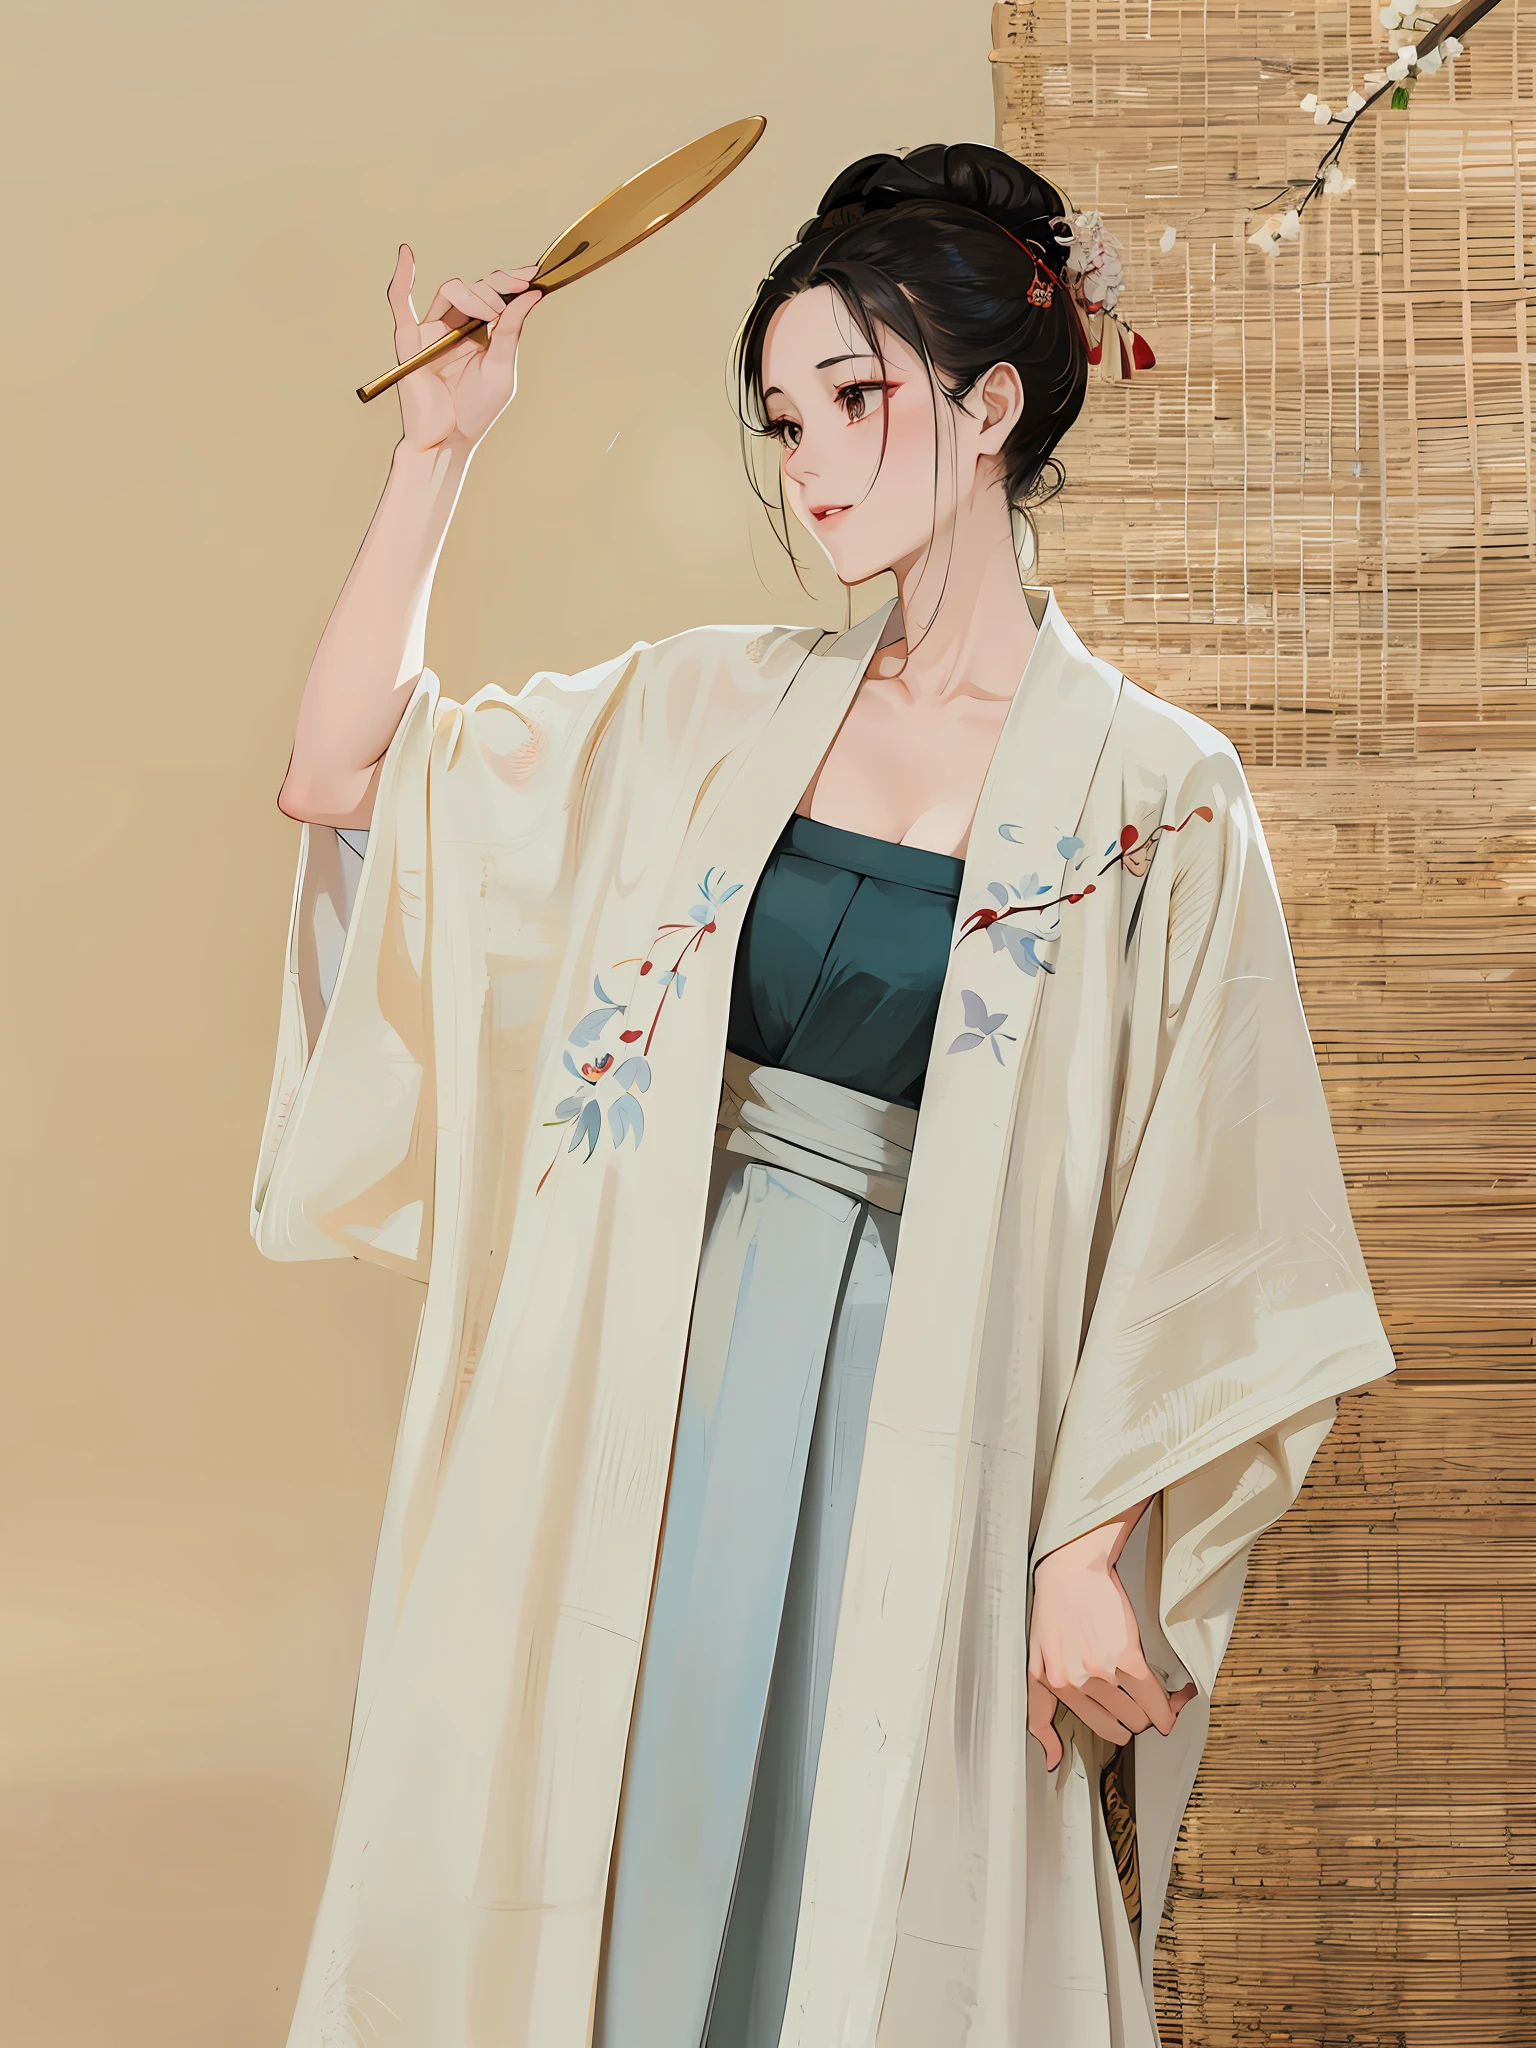 arafed woman in a 키모노 with a fan and a bamboo mat, 한푸, pale and coloured 키모노, 수놓은 예복, 키모노, classic 키모노, white 한푸, in 키모노, 일본 옷, long beautiful flowing 키모노, 용에게서 영감을 받은 천 로브, 배고픈 유령 축제, japanese 키모노, wearing 키모노, 간단한 가운을 입고, 하오리를 입고